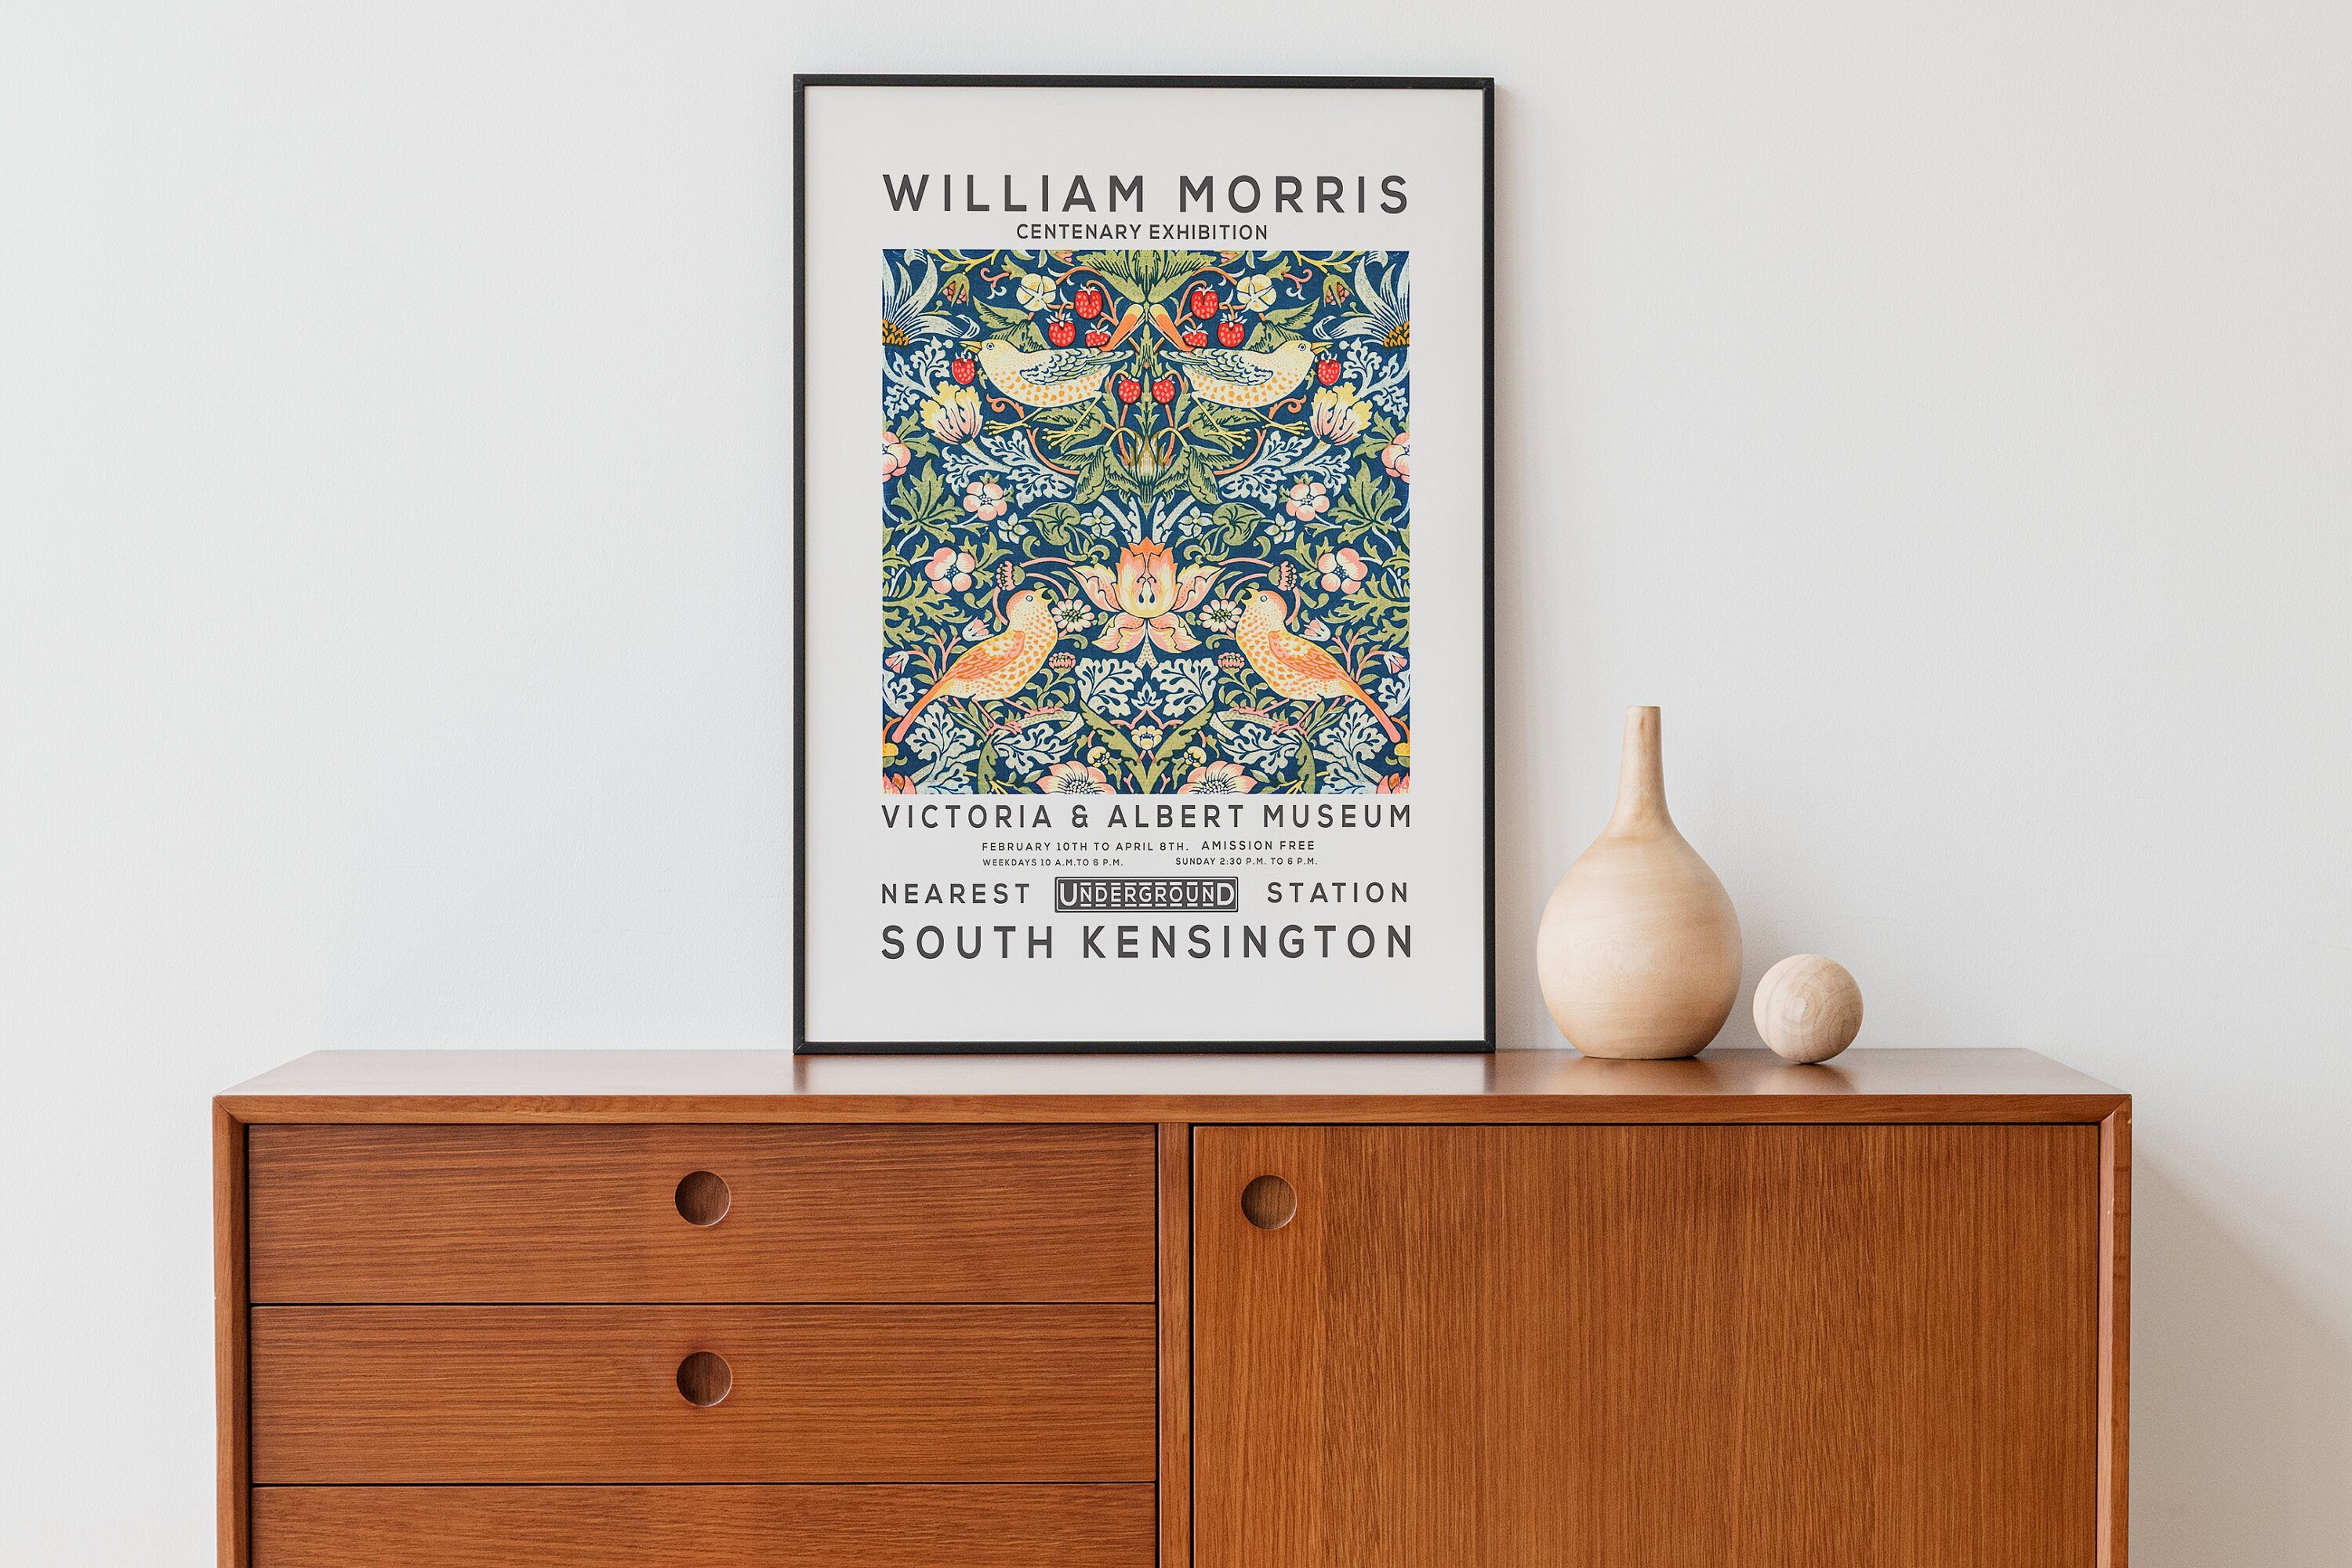 William Morris Print, Vintage Wall Decor, Exhibition Poster, Floral Wall Art, Flower Print, Home Decor, Strawberry Thieves